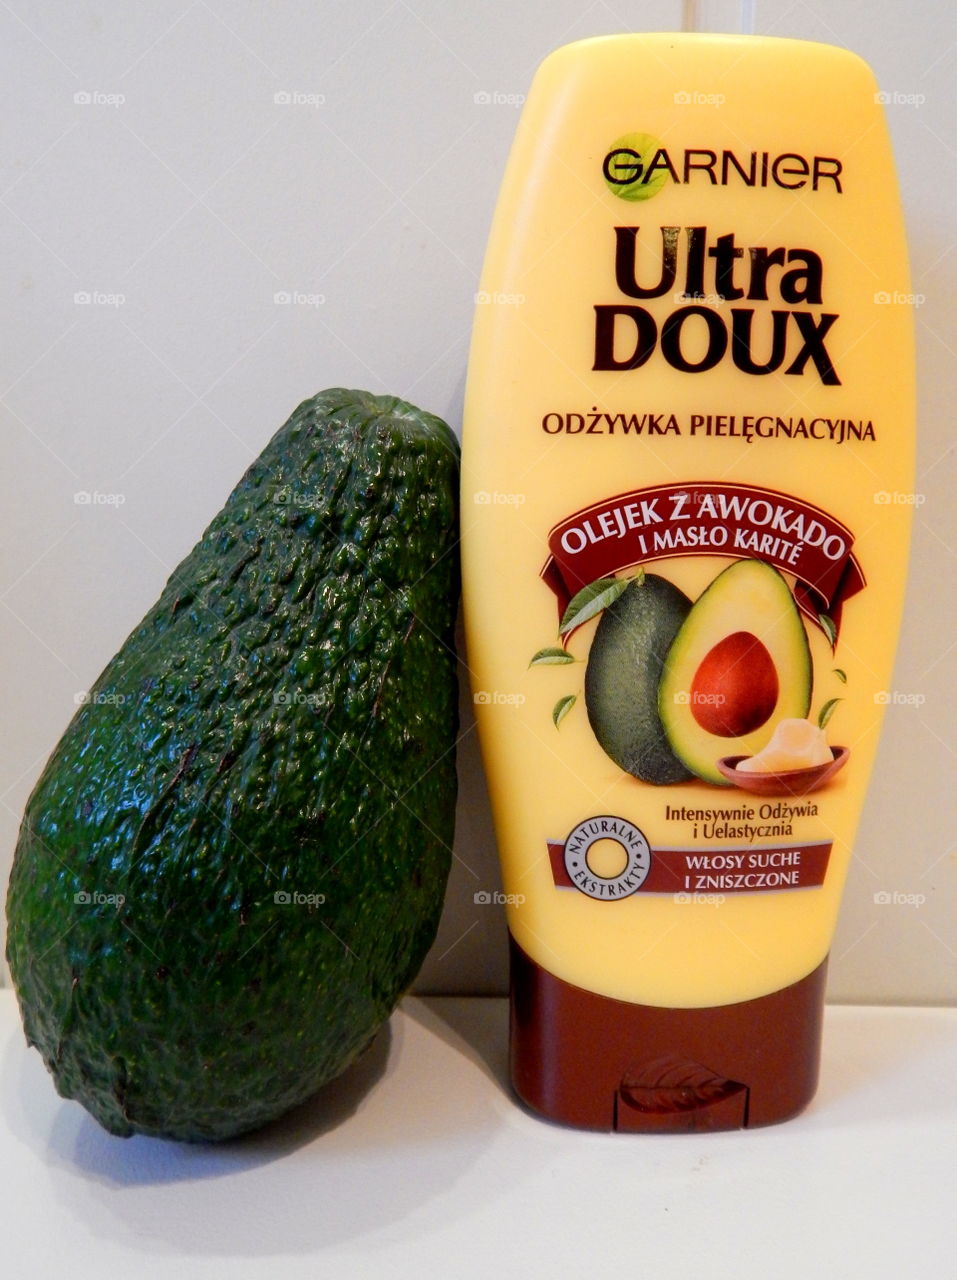 My favourite hair conditioner with avocado by Garnier